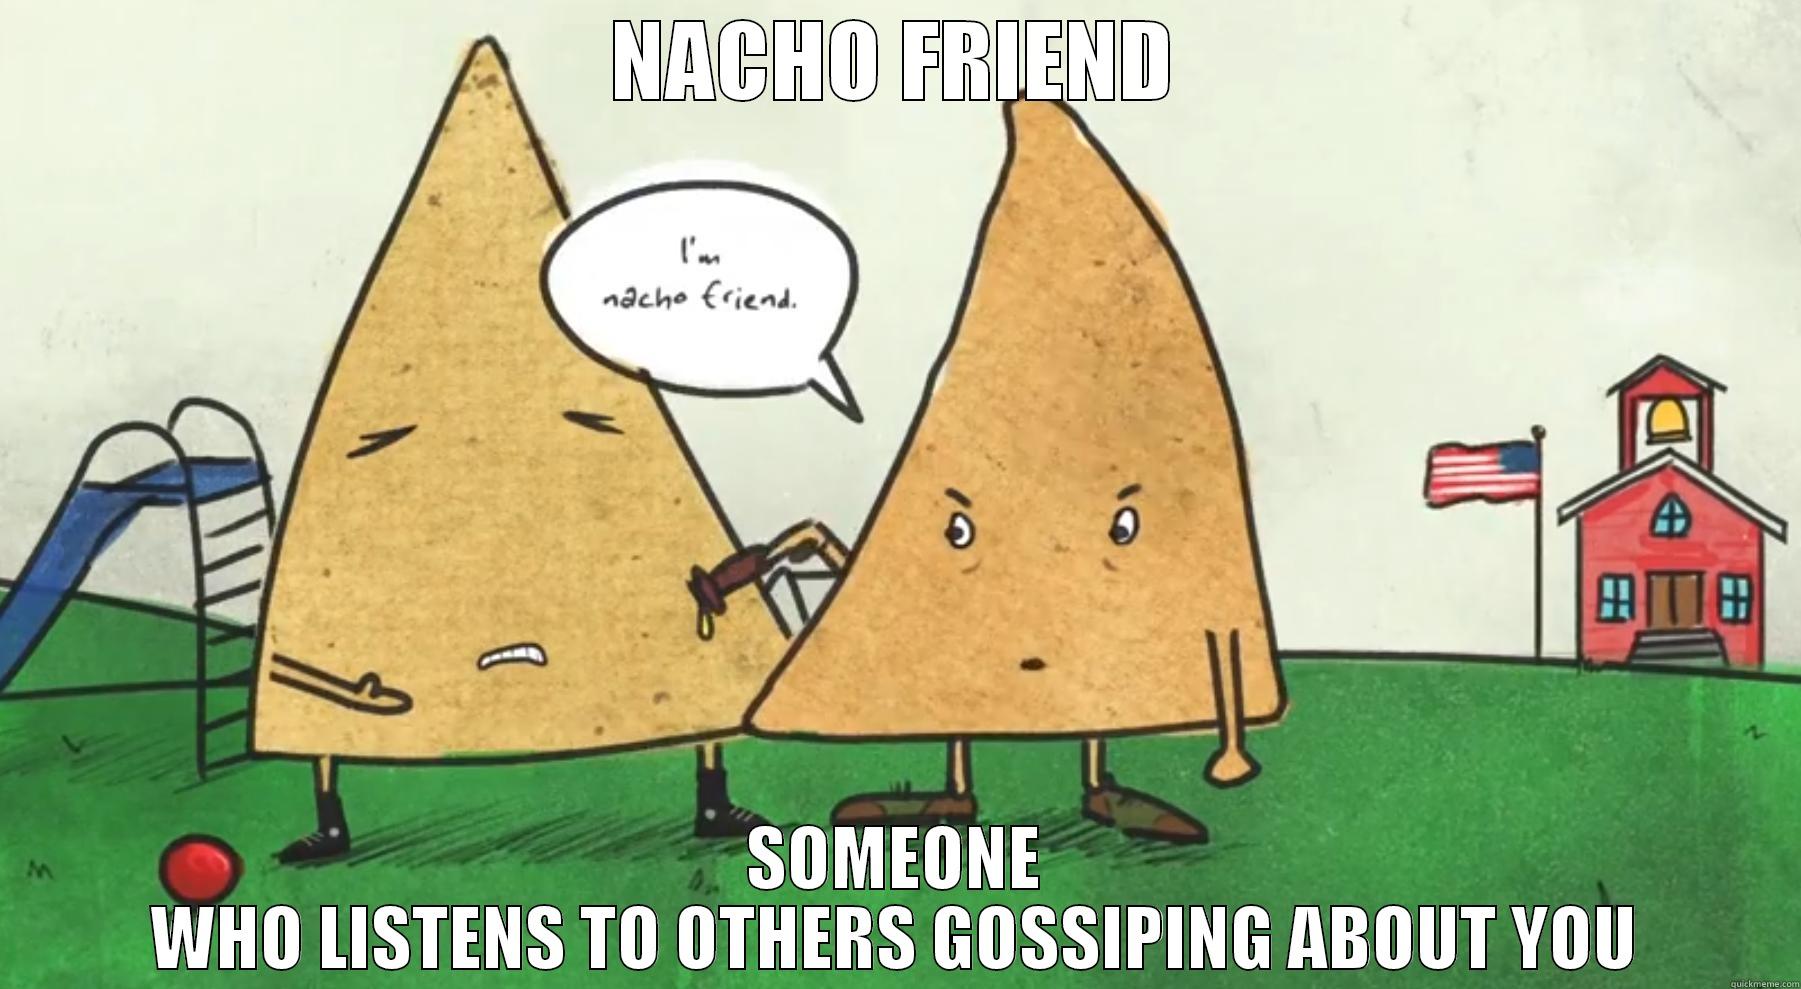 NACHO FRIEND - NACHO FRIEND SOMEONE WHO LISTENS TO OTHERS GOSSIPING ABOUT YOU Misc